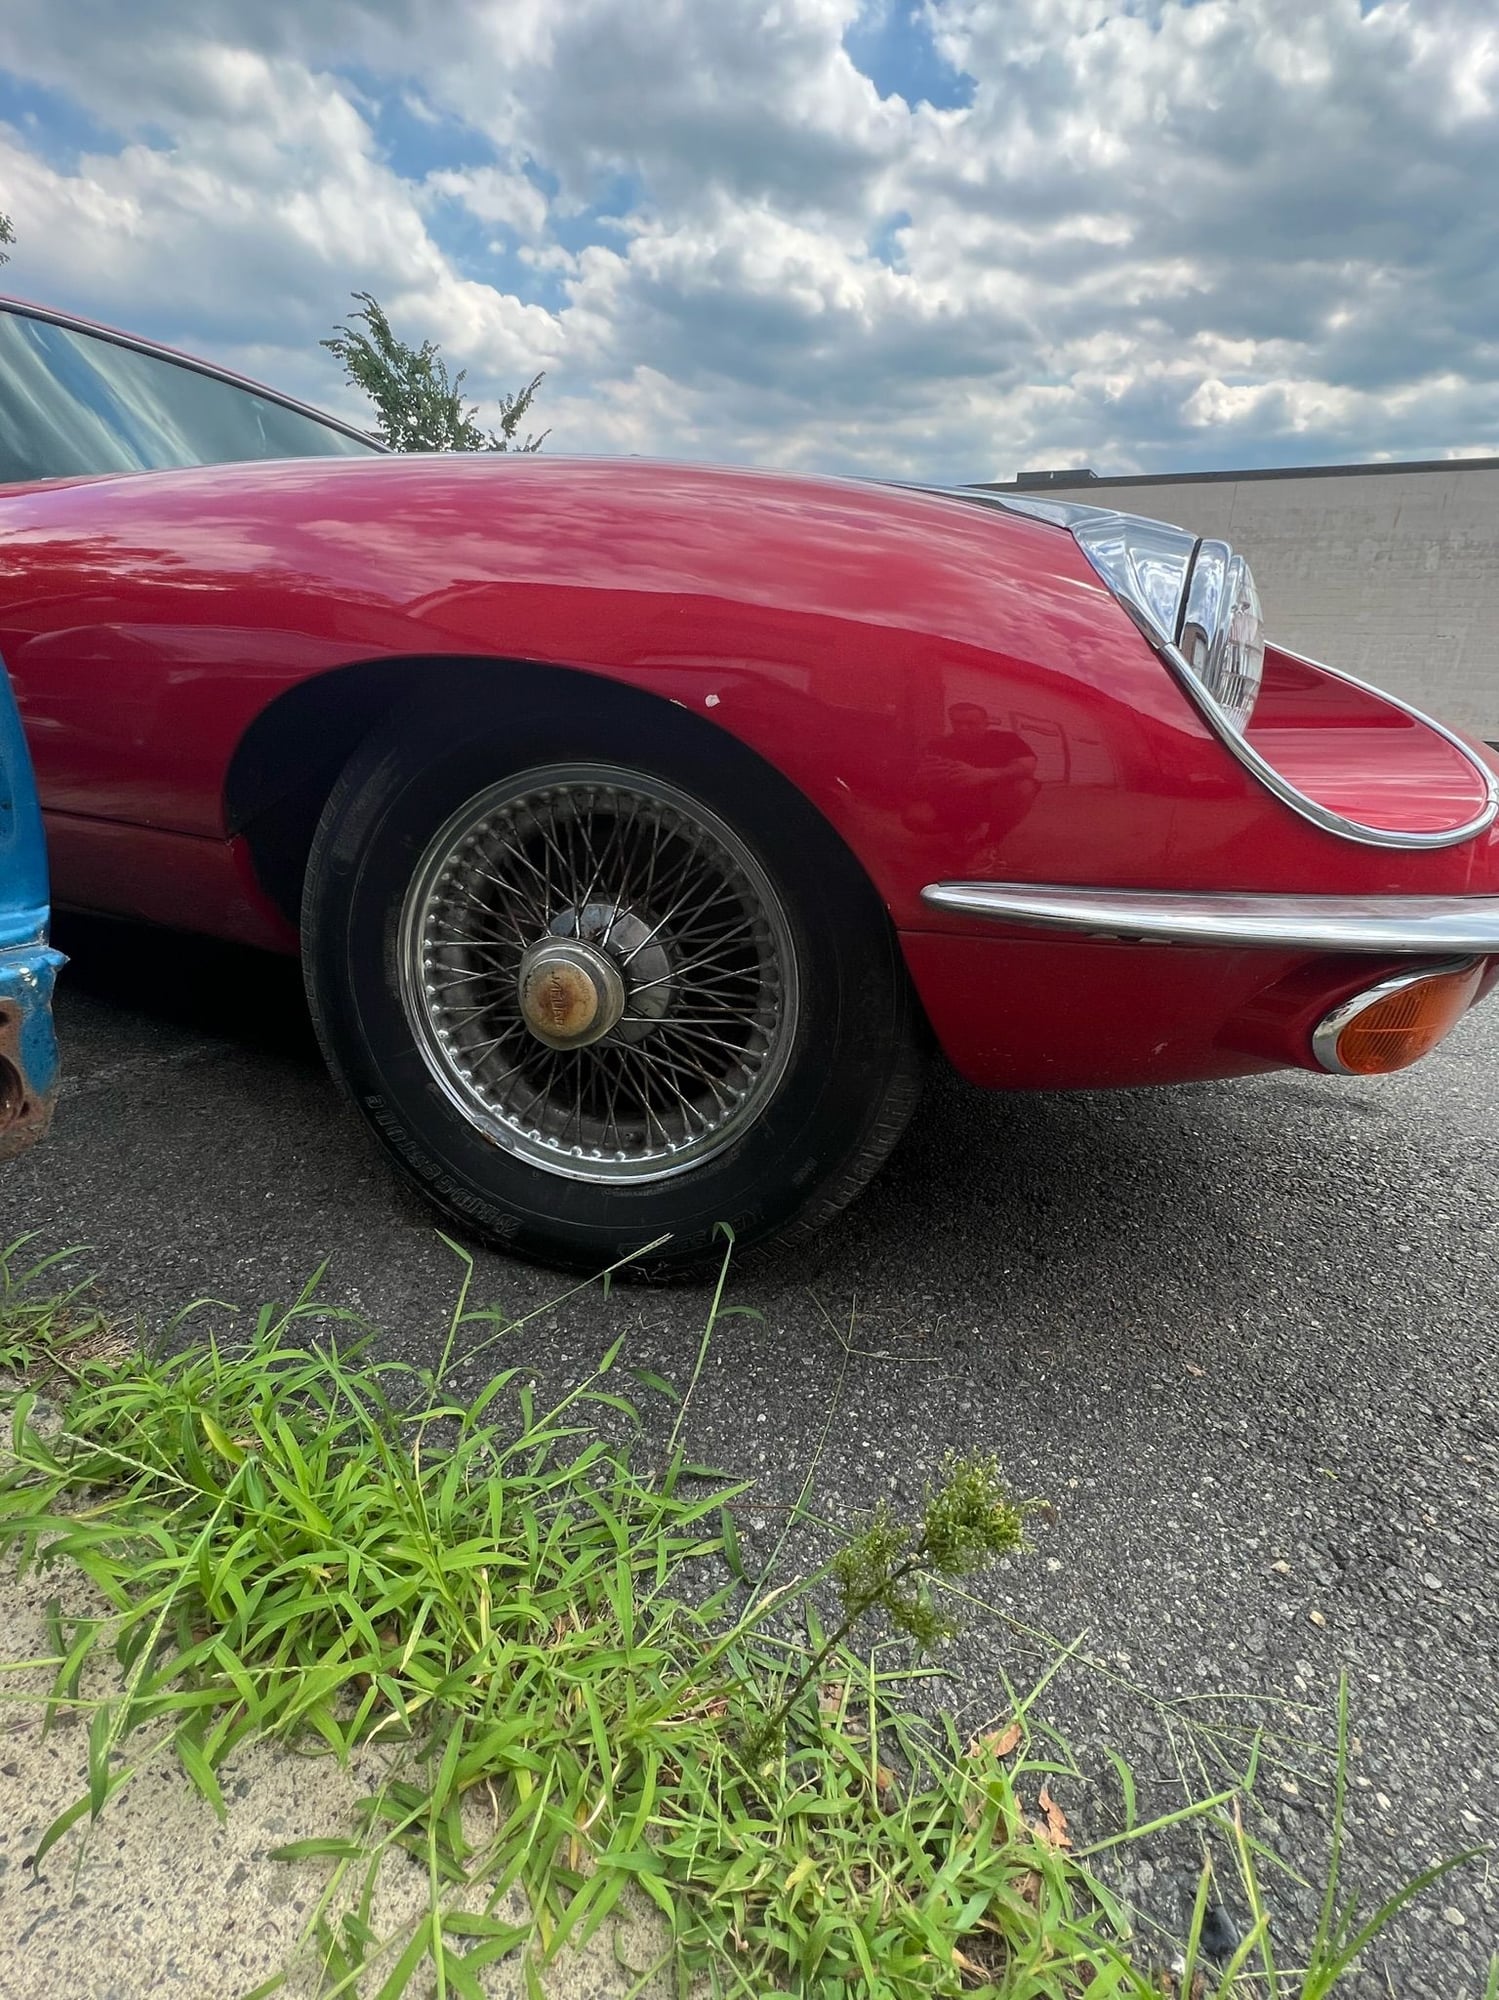 1969 Jaguar XKE - 1969 Jaguar E-Type/XKE FHC S2 - Used - VIN P1R26899 - 63,456 Miles - 6 cyl - 2WD - Manual - Coupe - Red - Los Angeles, CA 90027, United States